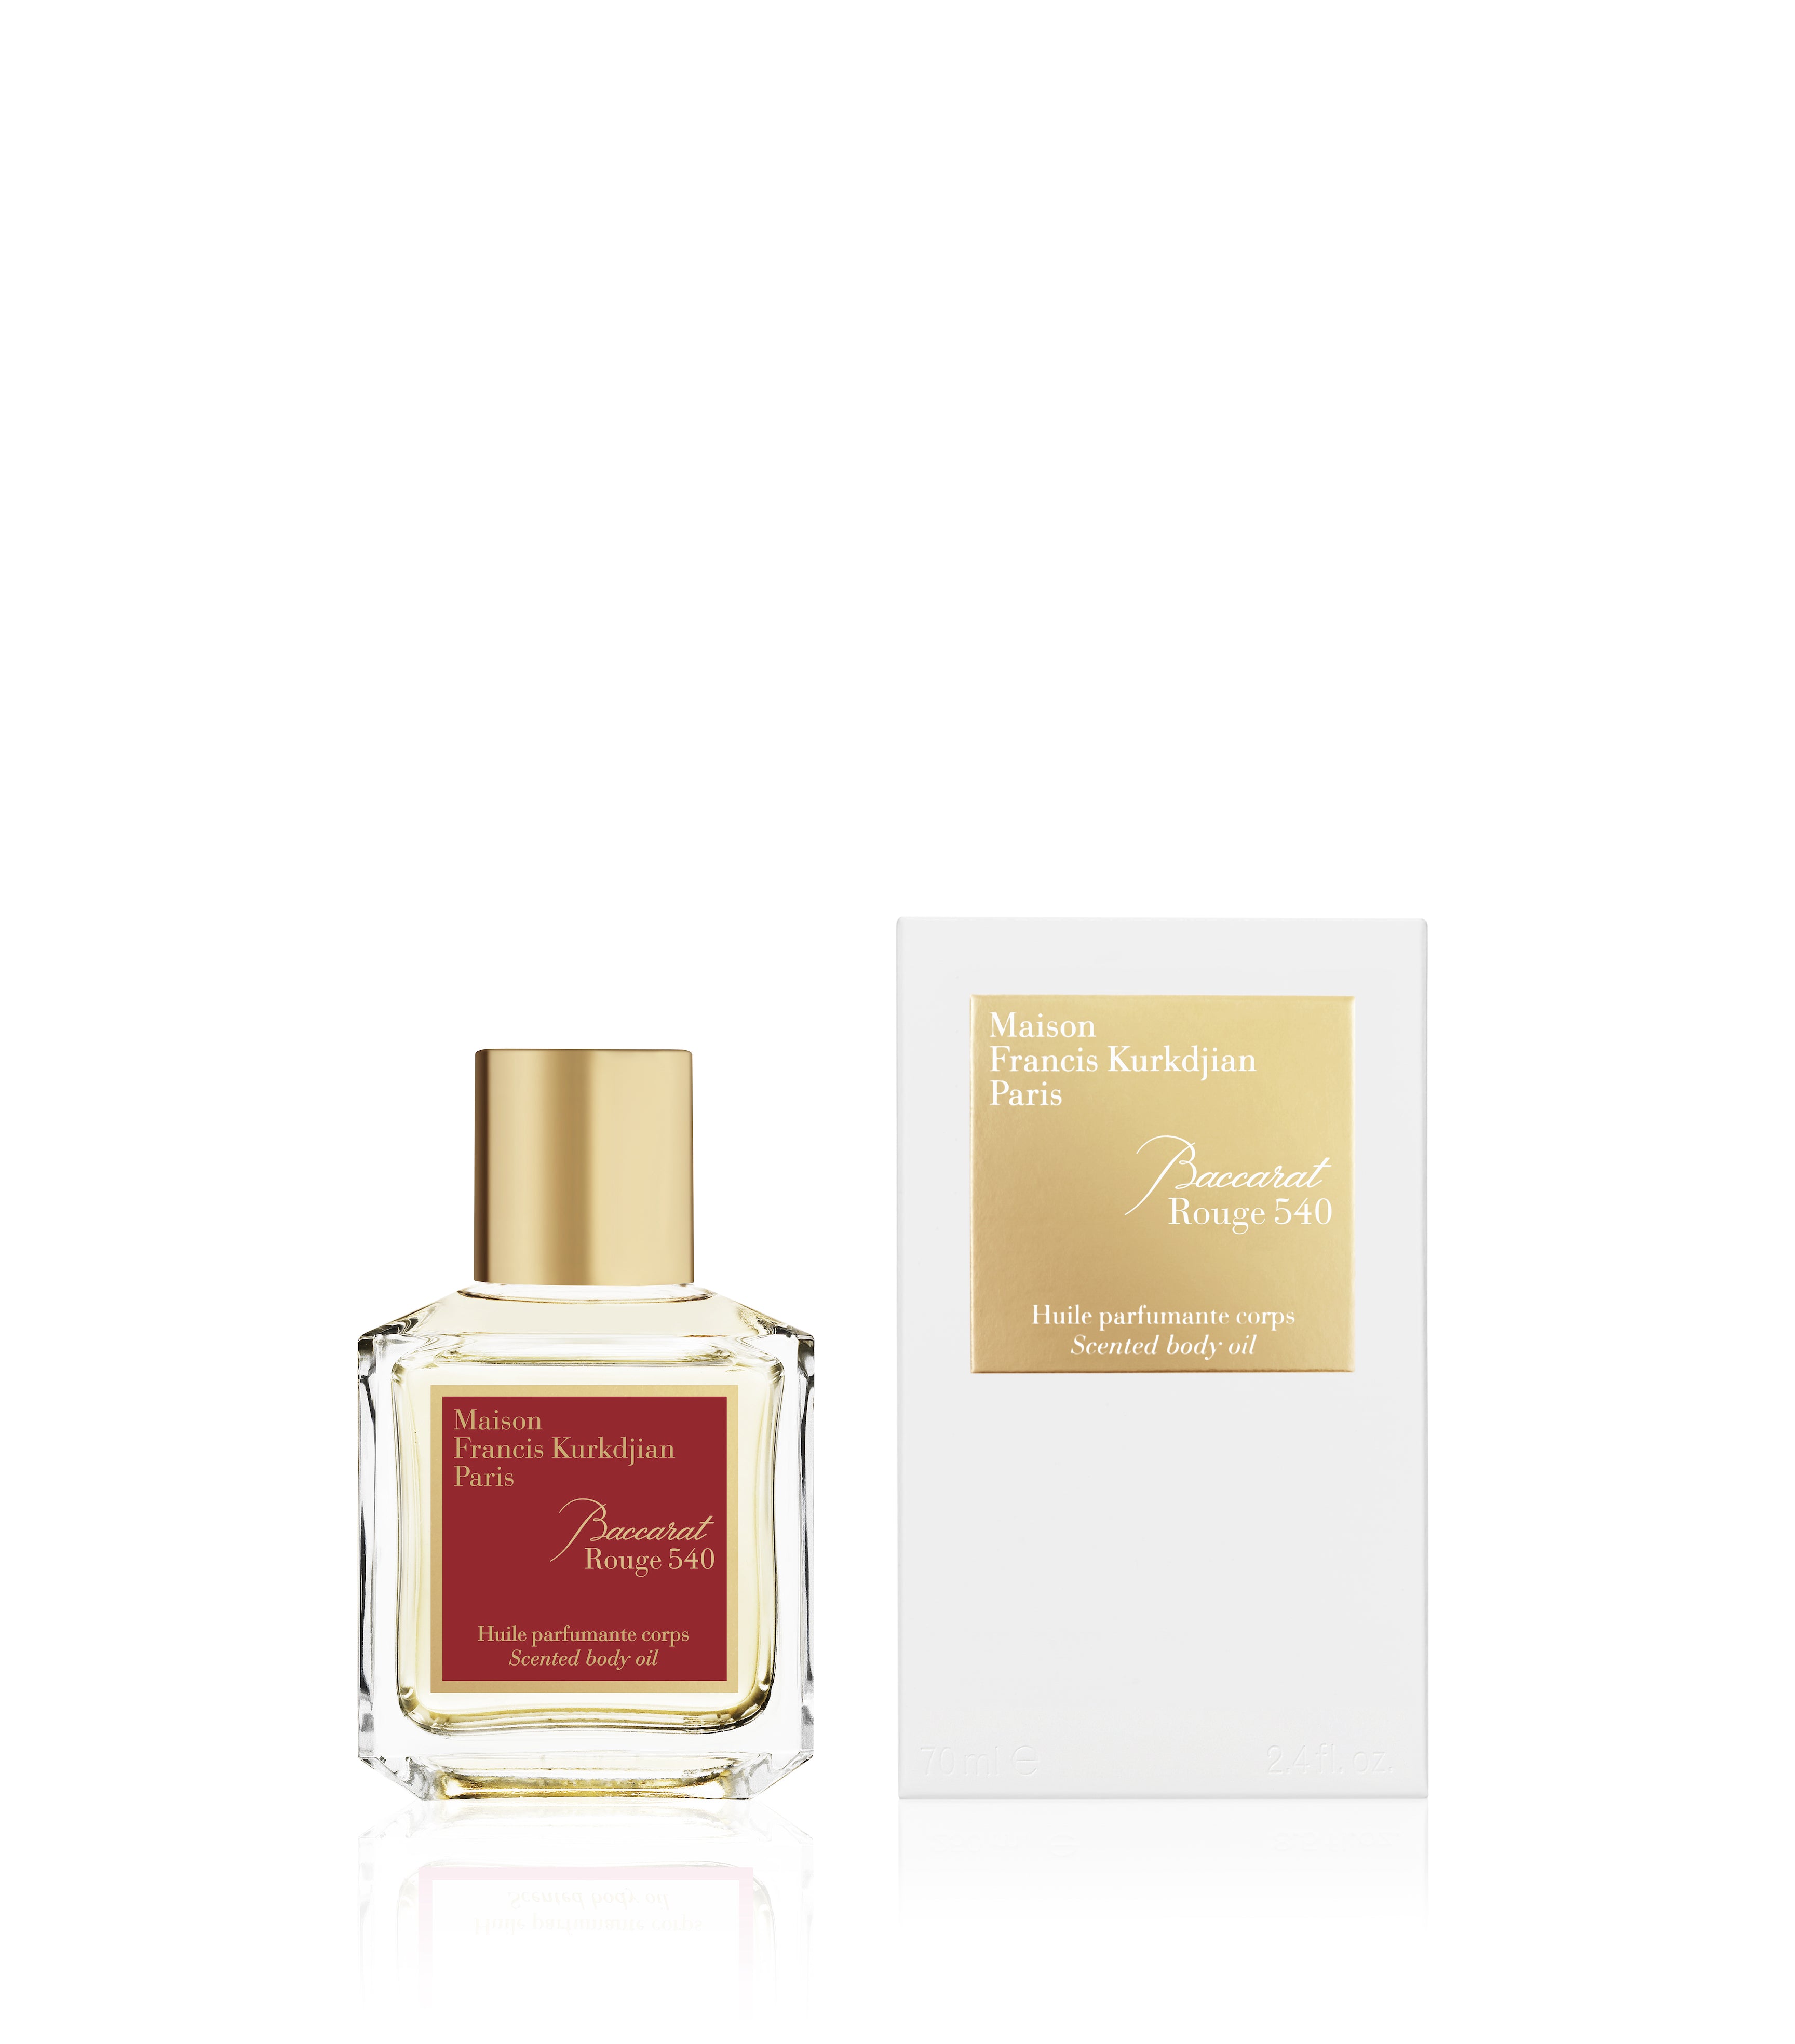 Baccarat Rouge 540 scented body oil